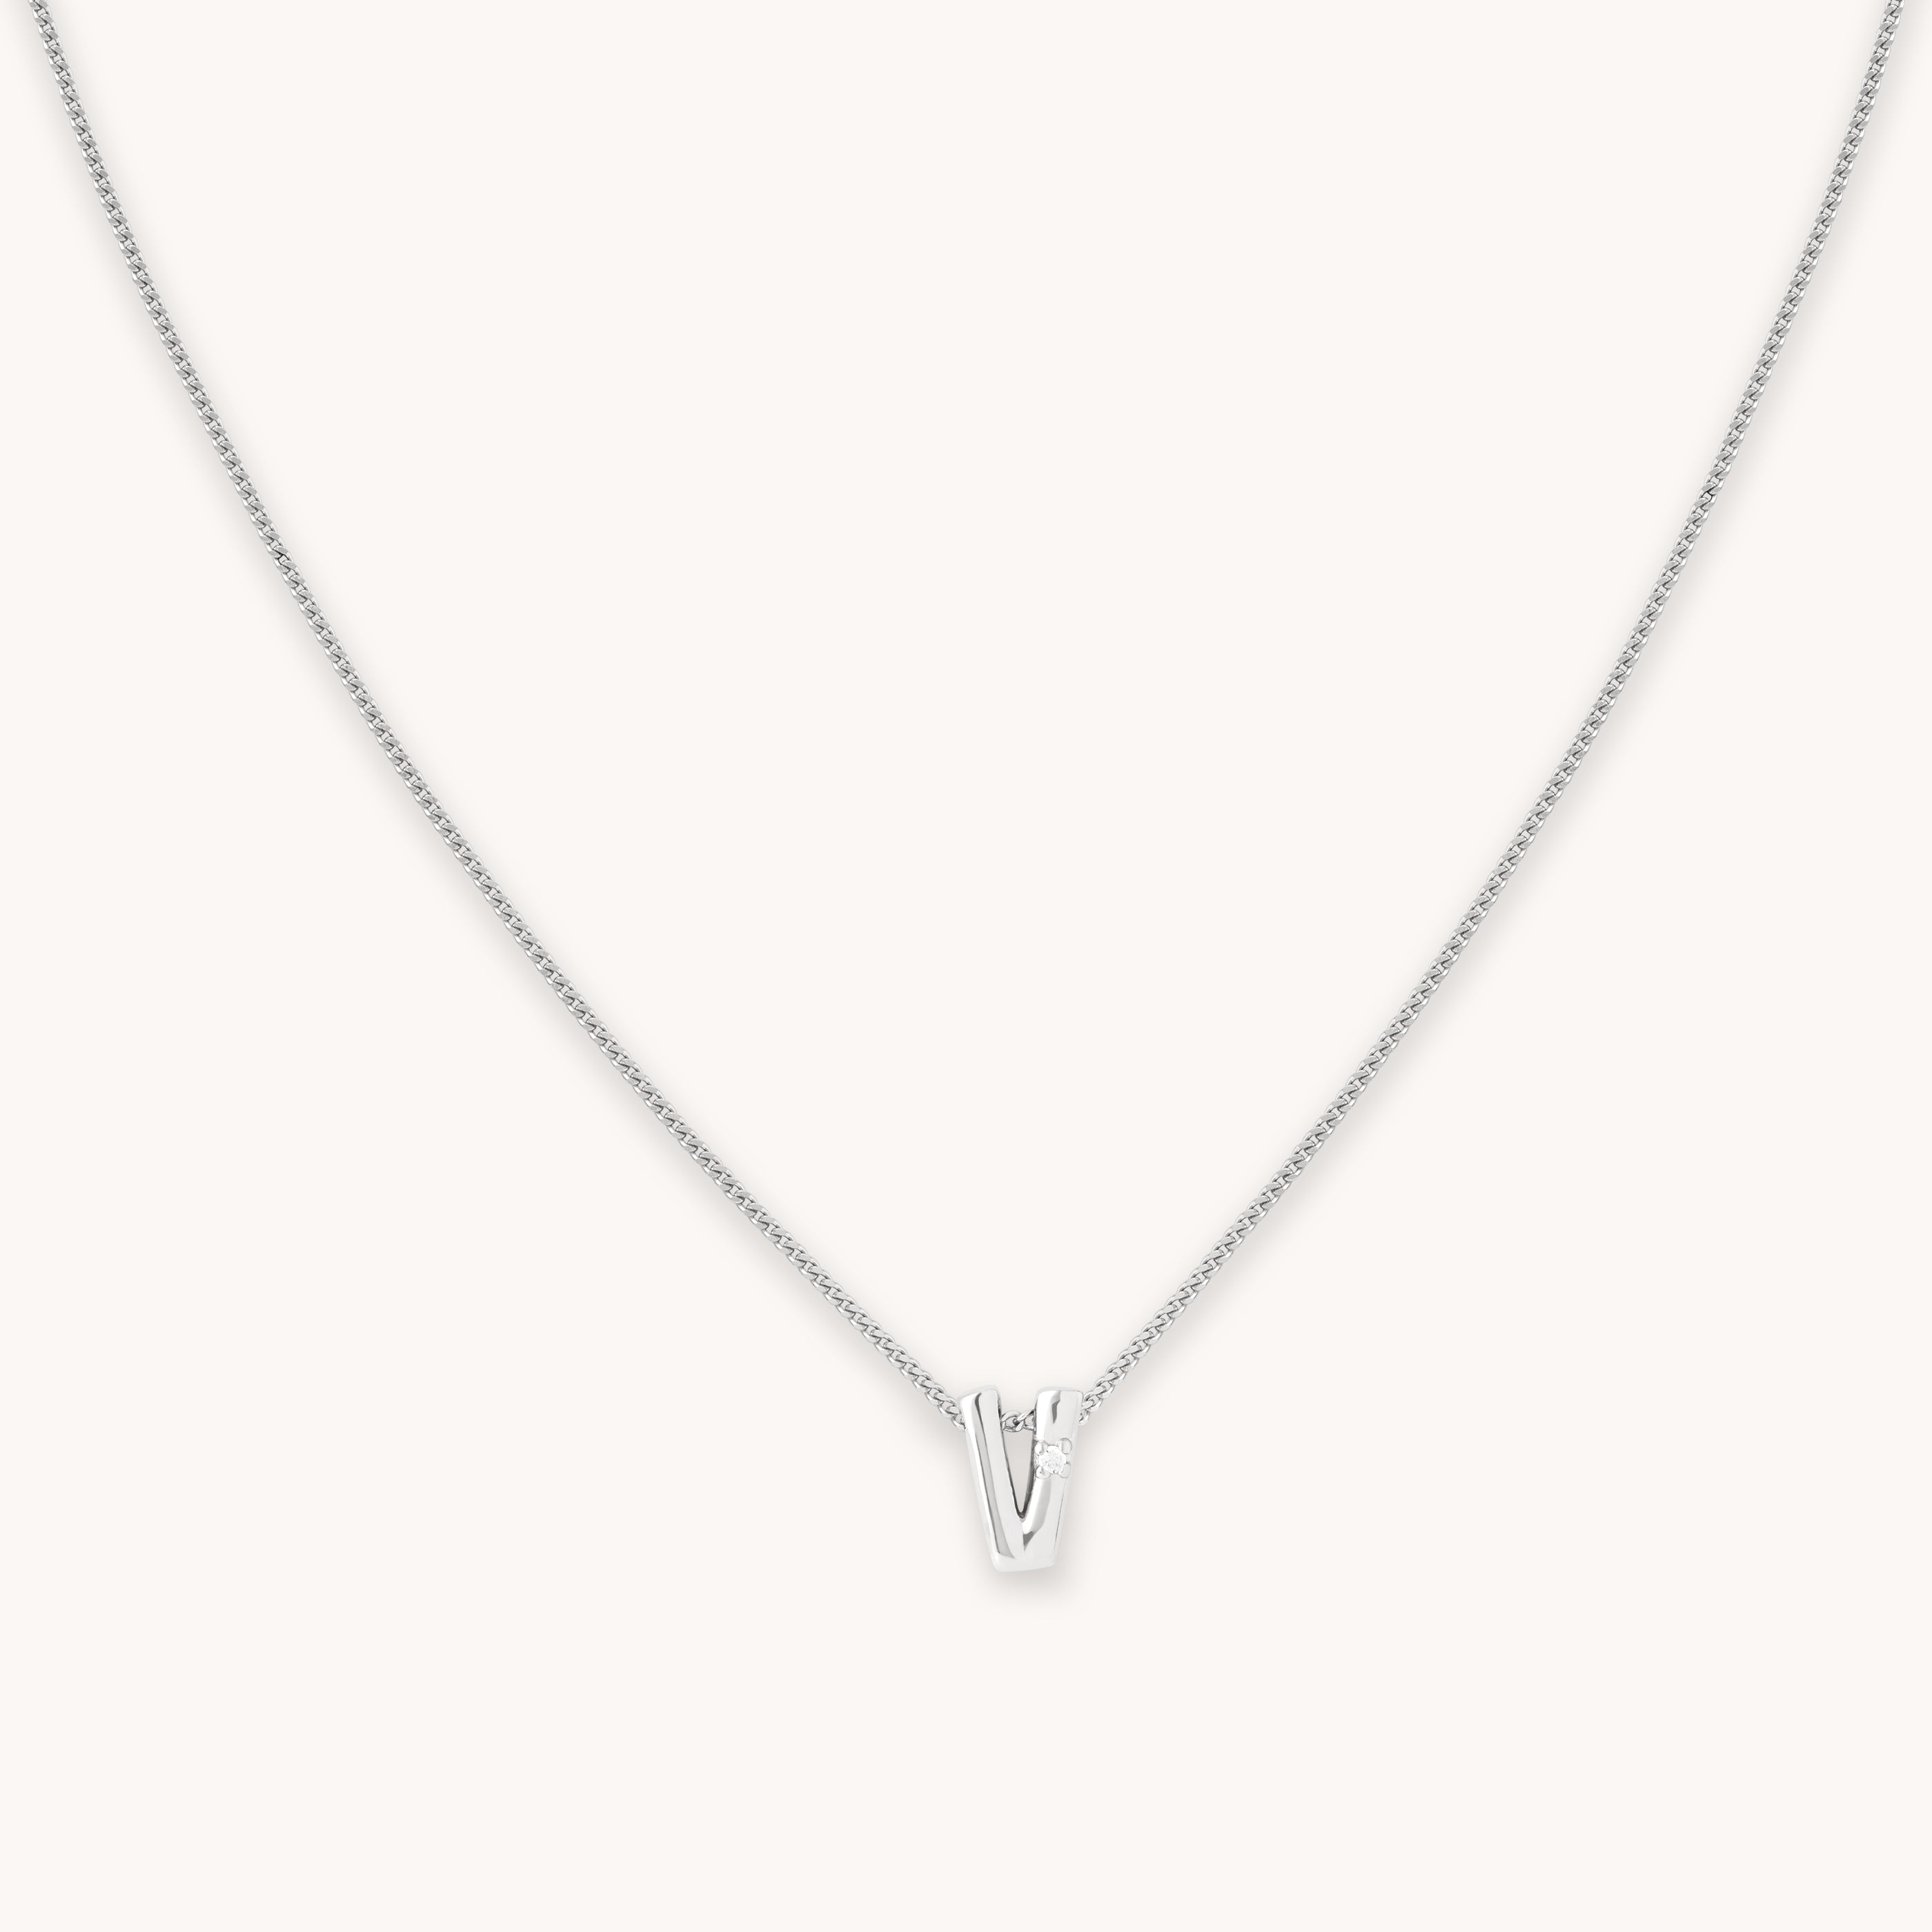 V Initial Pendant Necklace in Silver